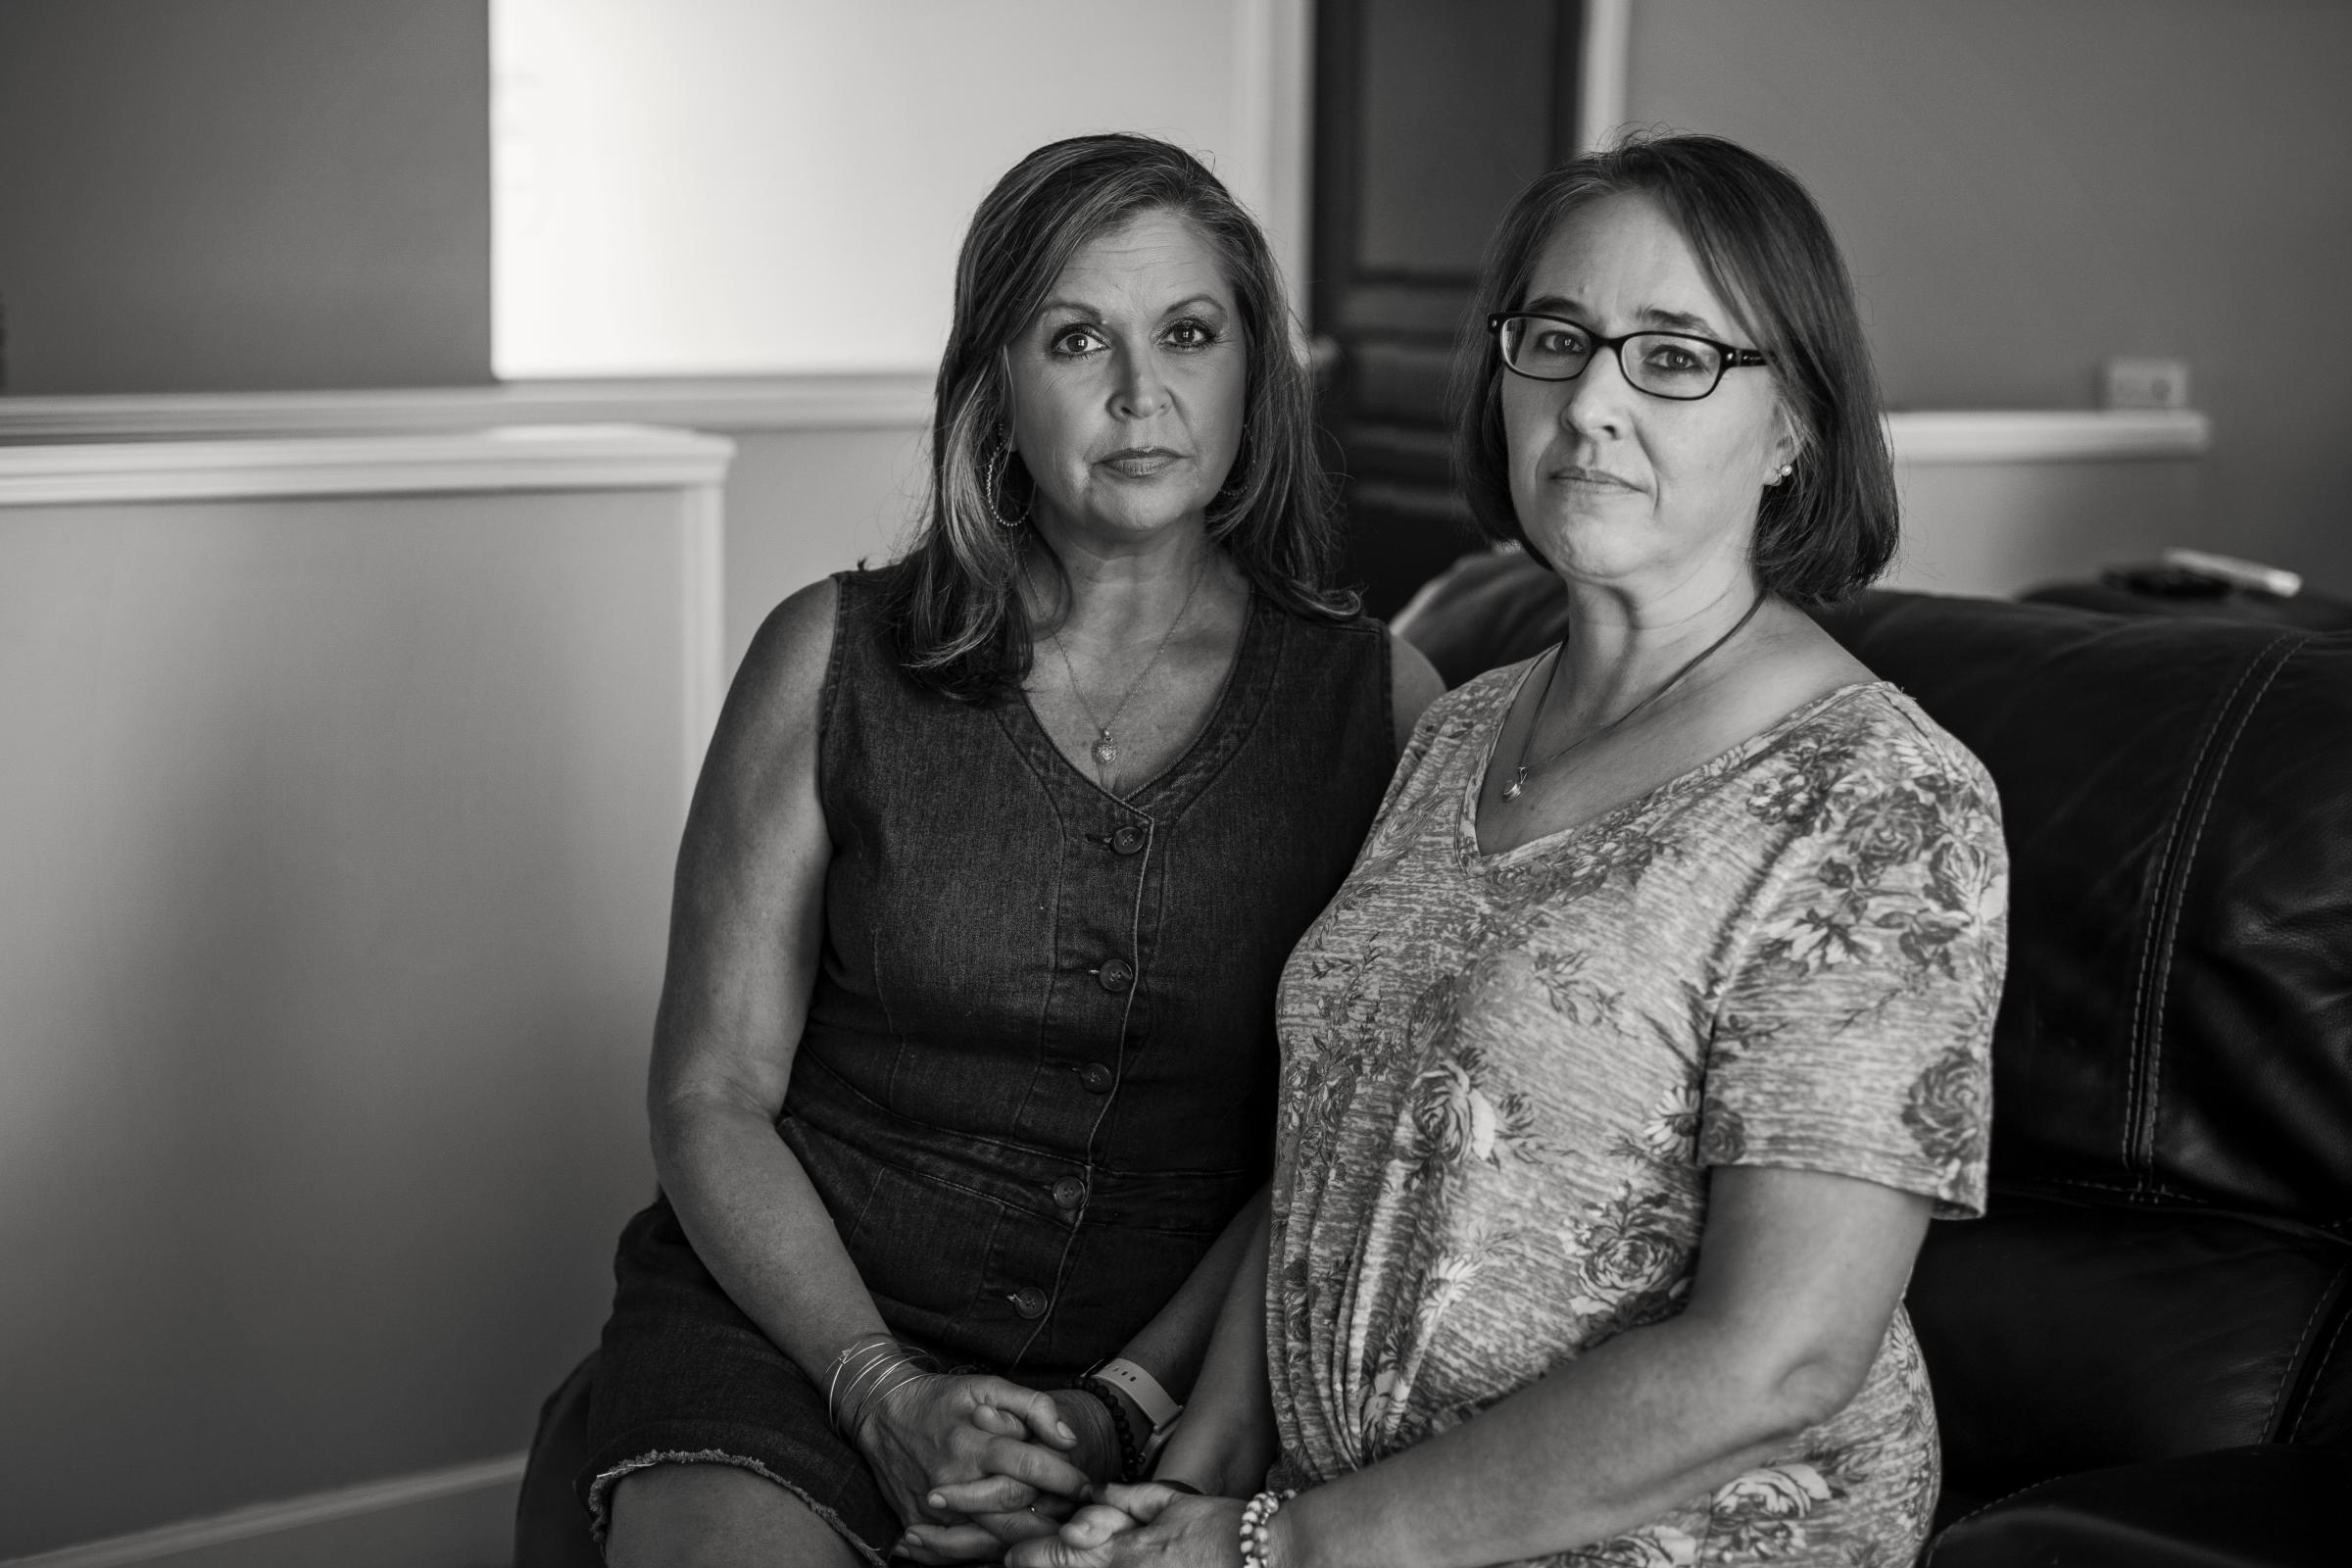 Scared, Sad, and Ashamed: The Lonely Journey when a Child is in Crisis - Charlotte, NC, moms Jenny and Michelle, whose teenagers...